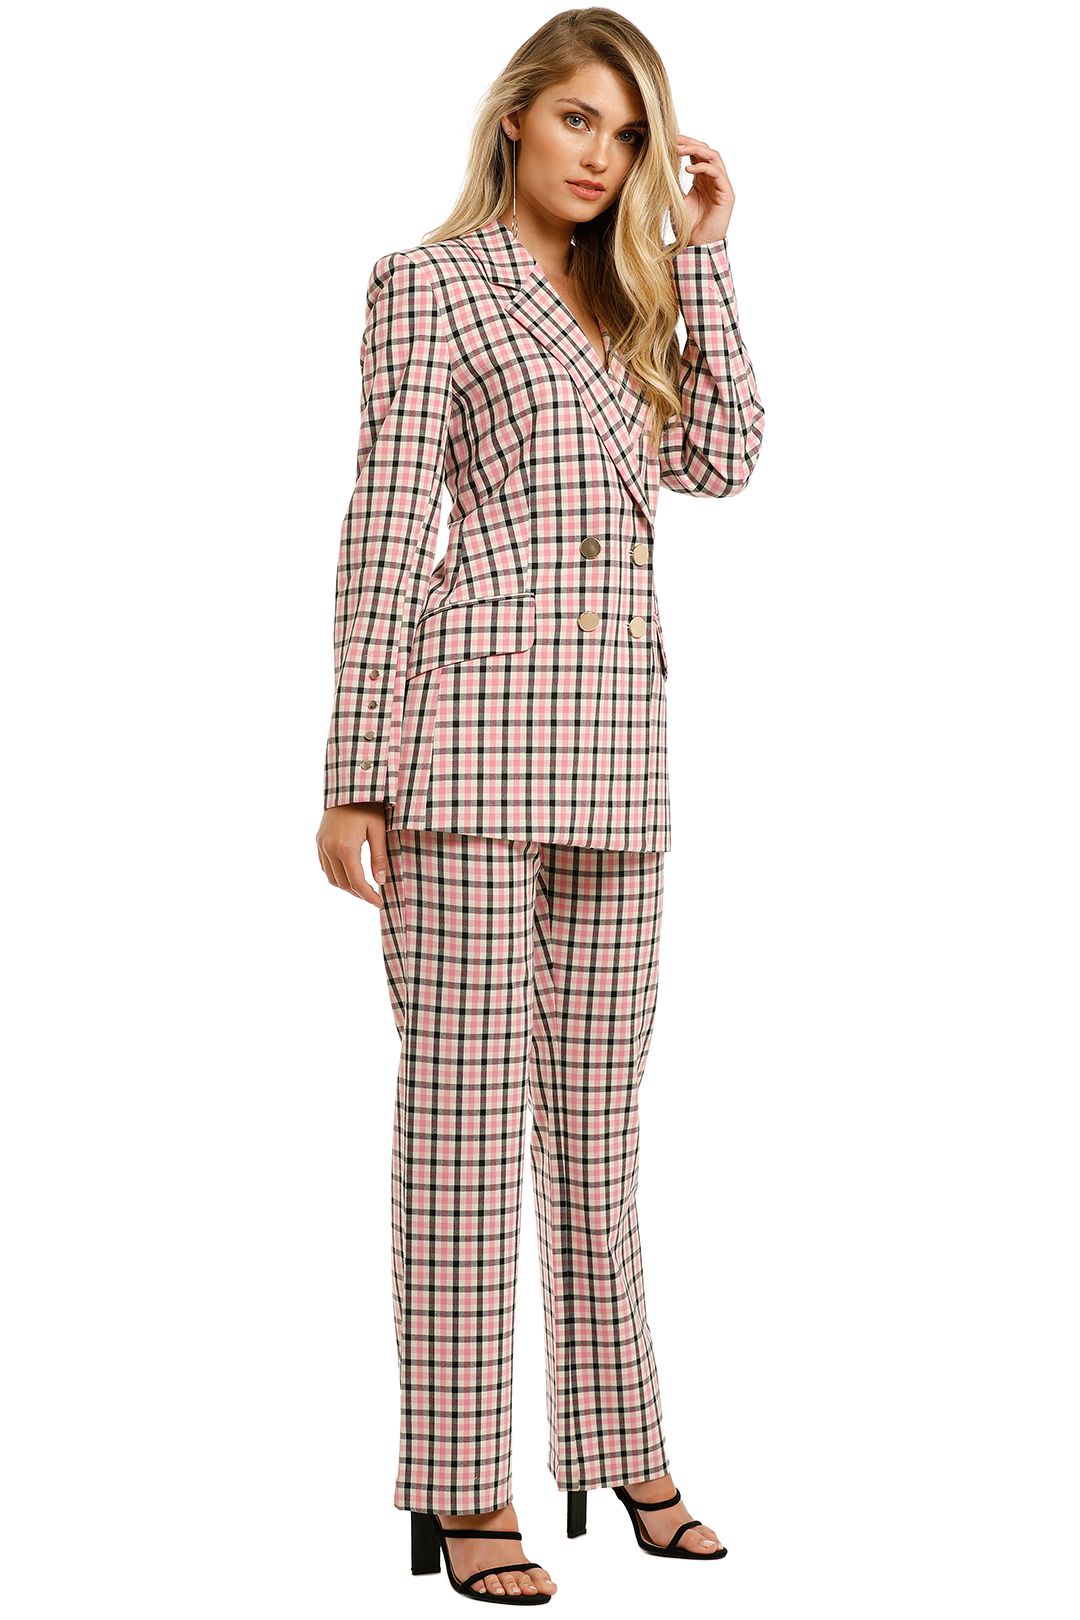 Pasduchas-Checker-Blazer-and-Pant-Suit-Pink-Check-Side